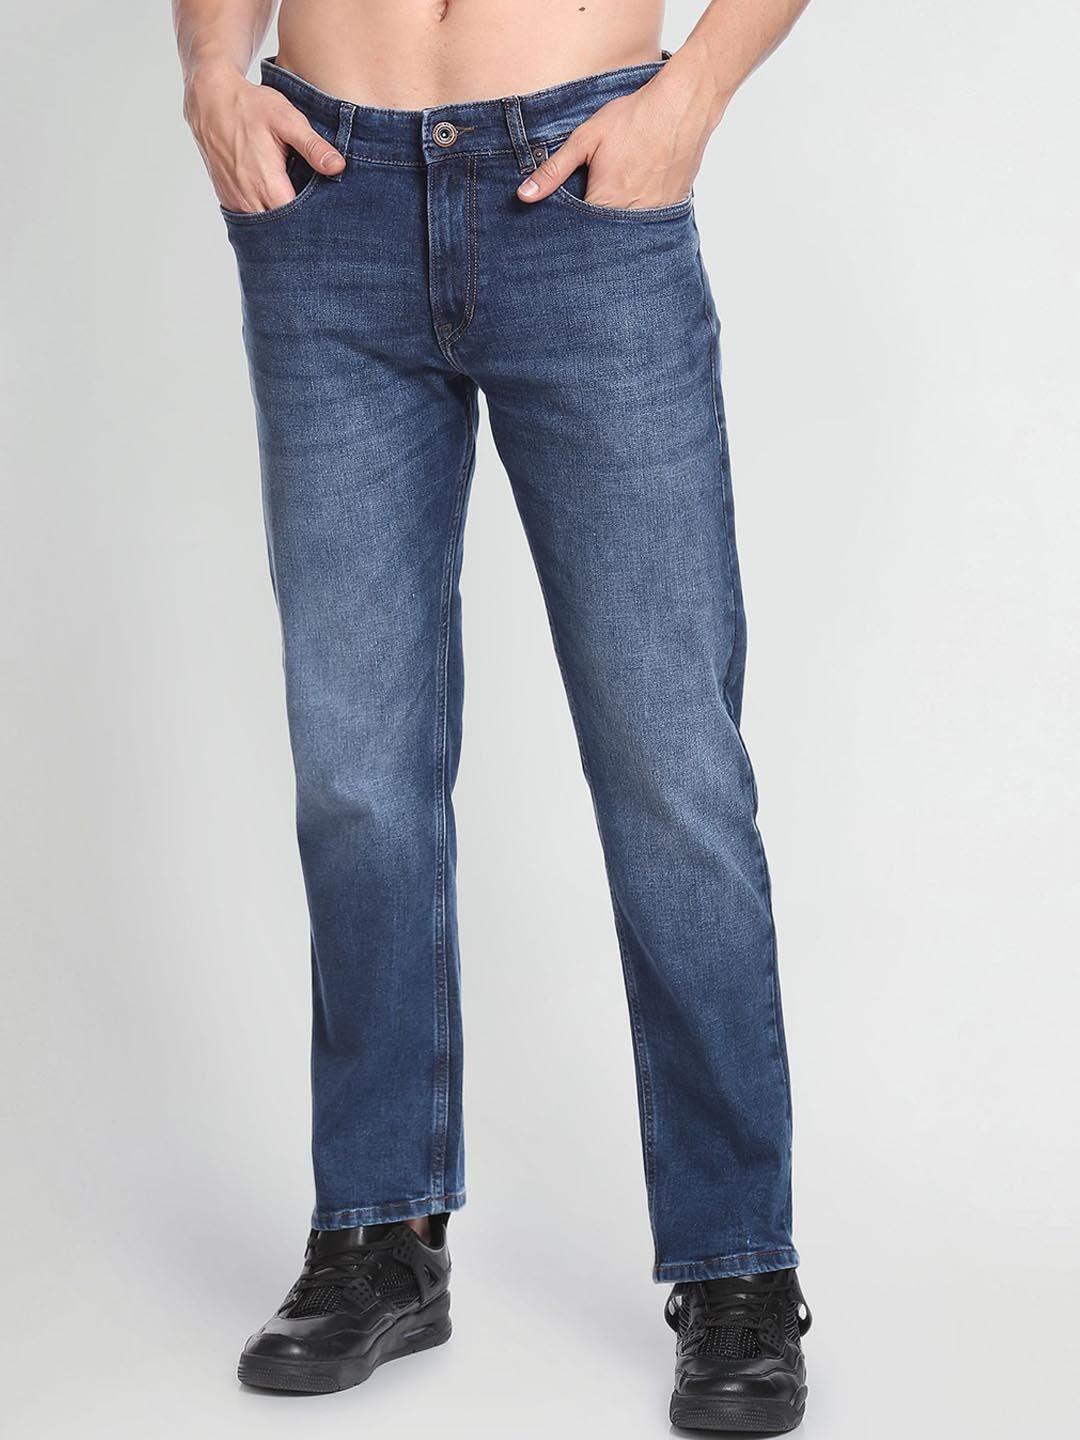 flying-machine-men-straight-fit-light-fade-mid-rise-stretchable-jeans